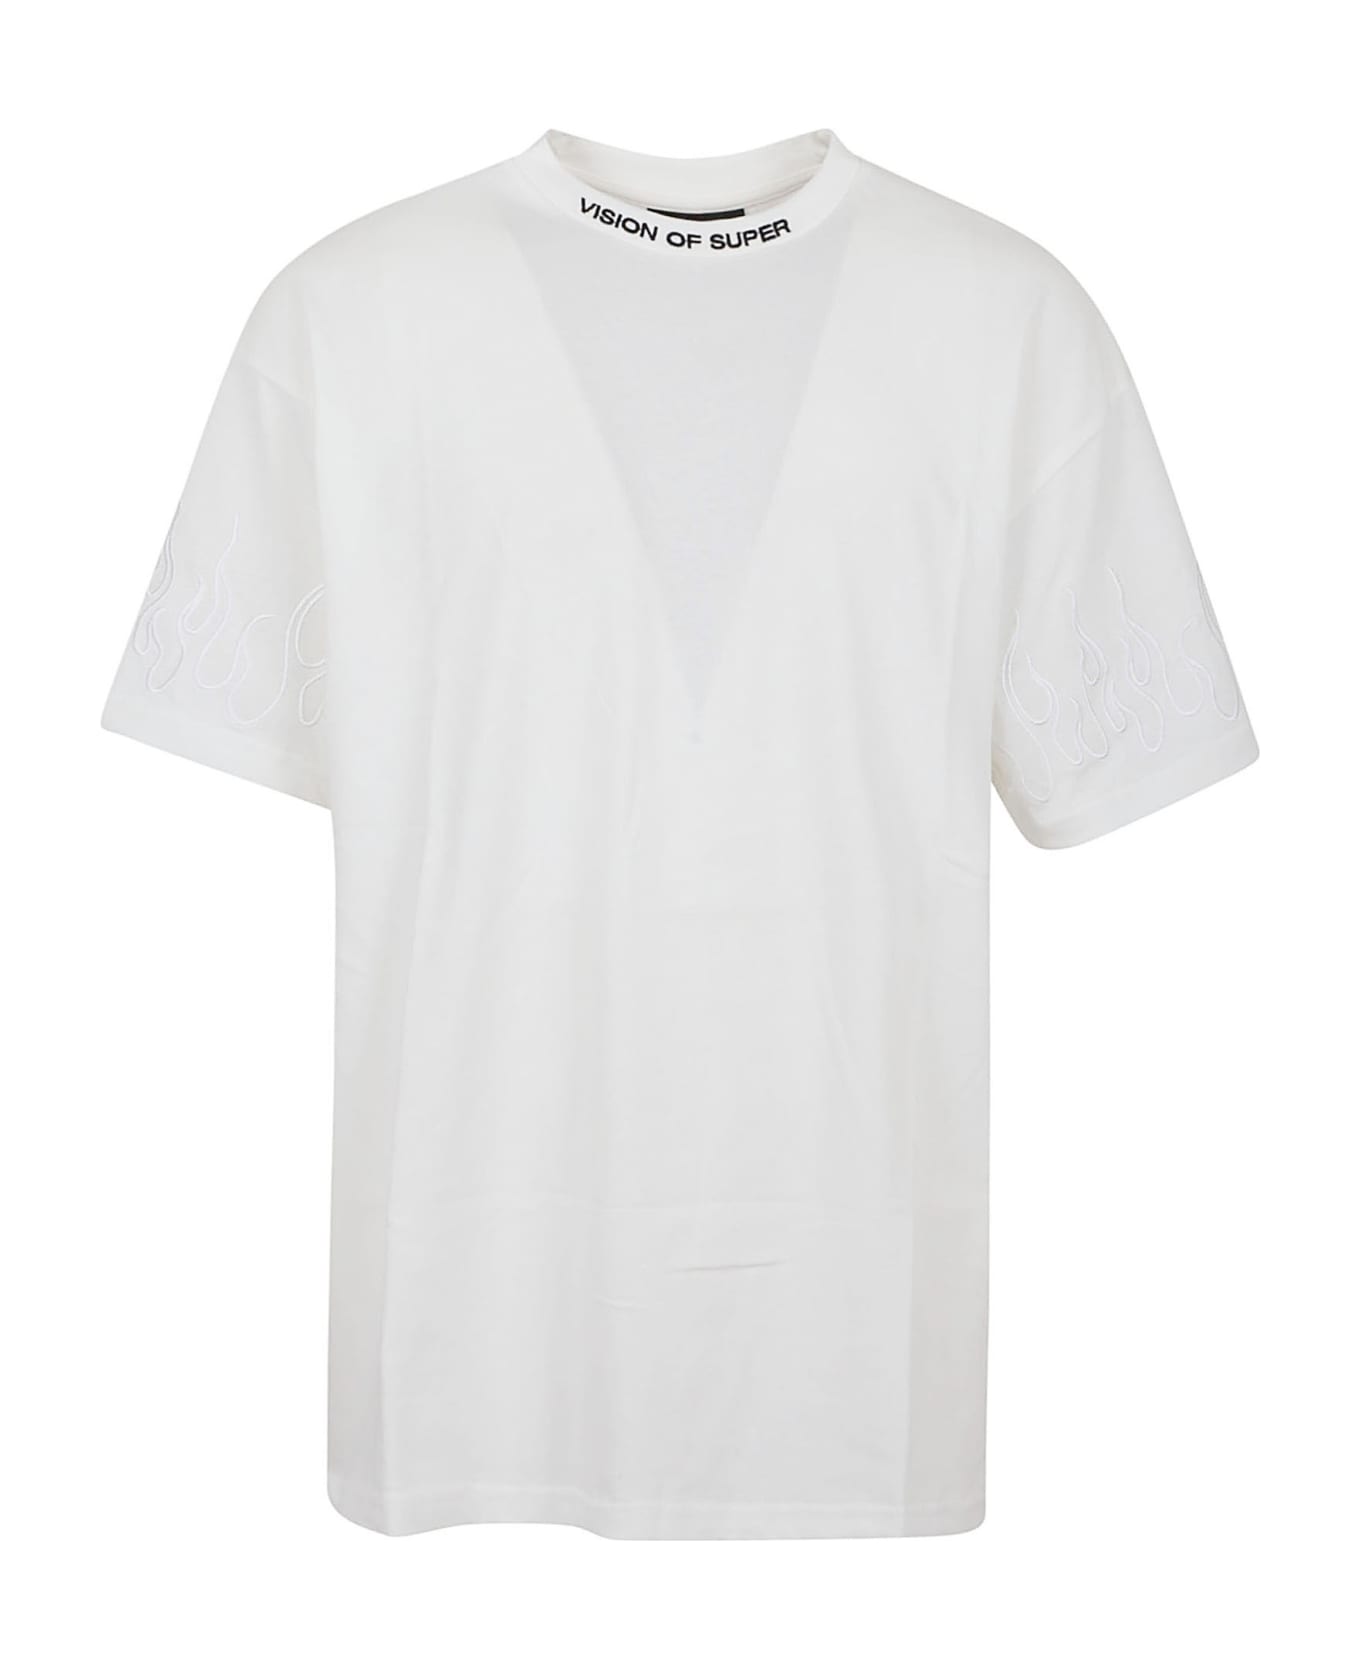 Vision of Super White Tshirt With White Embroidered Flames - White